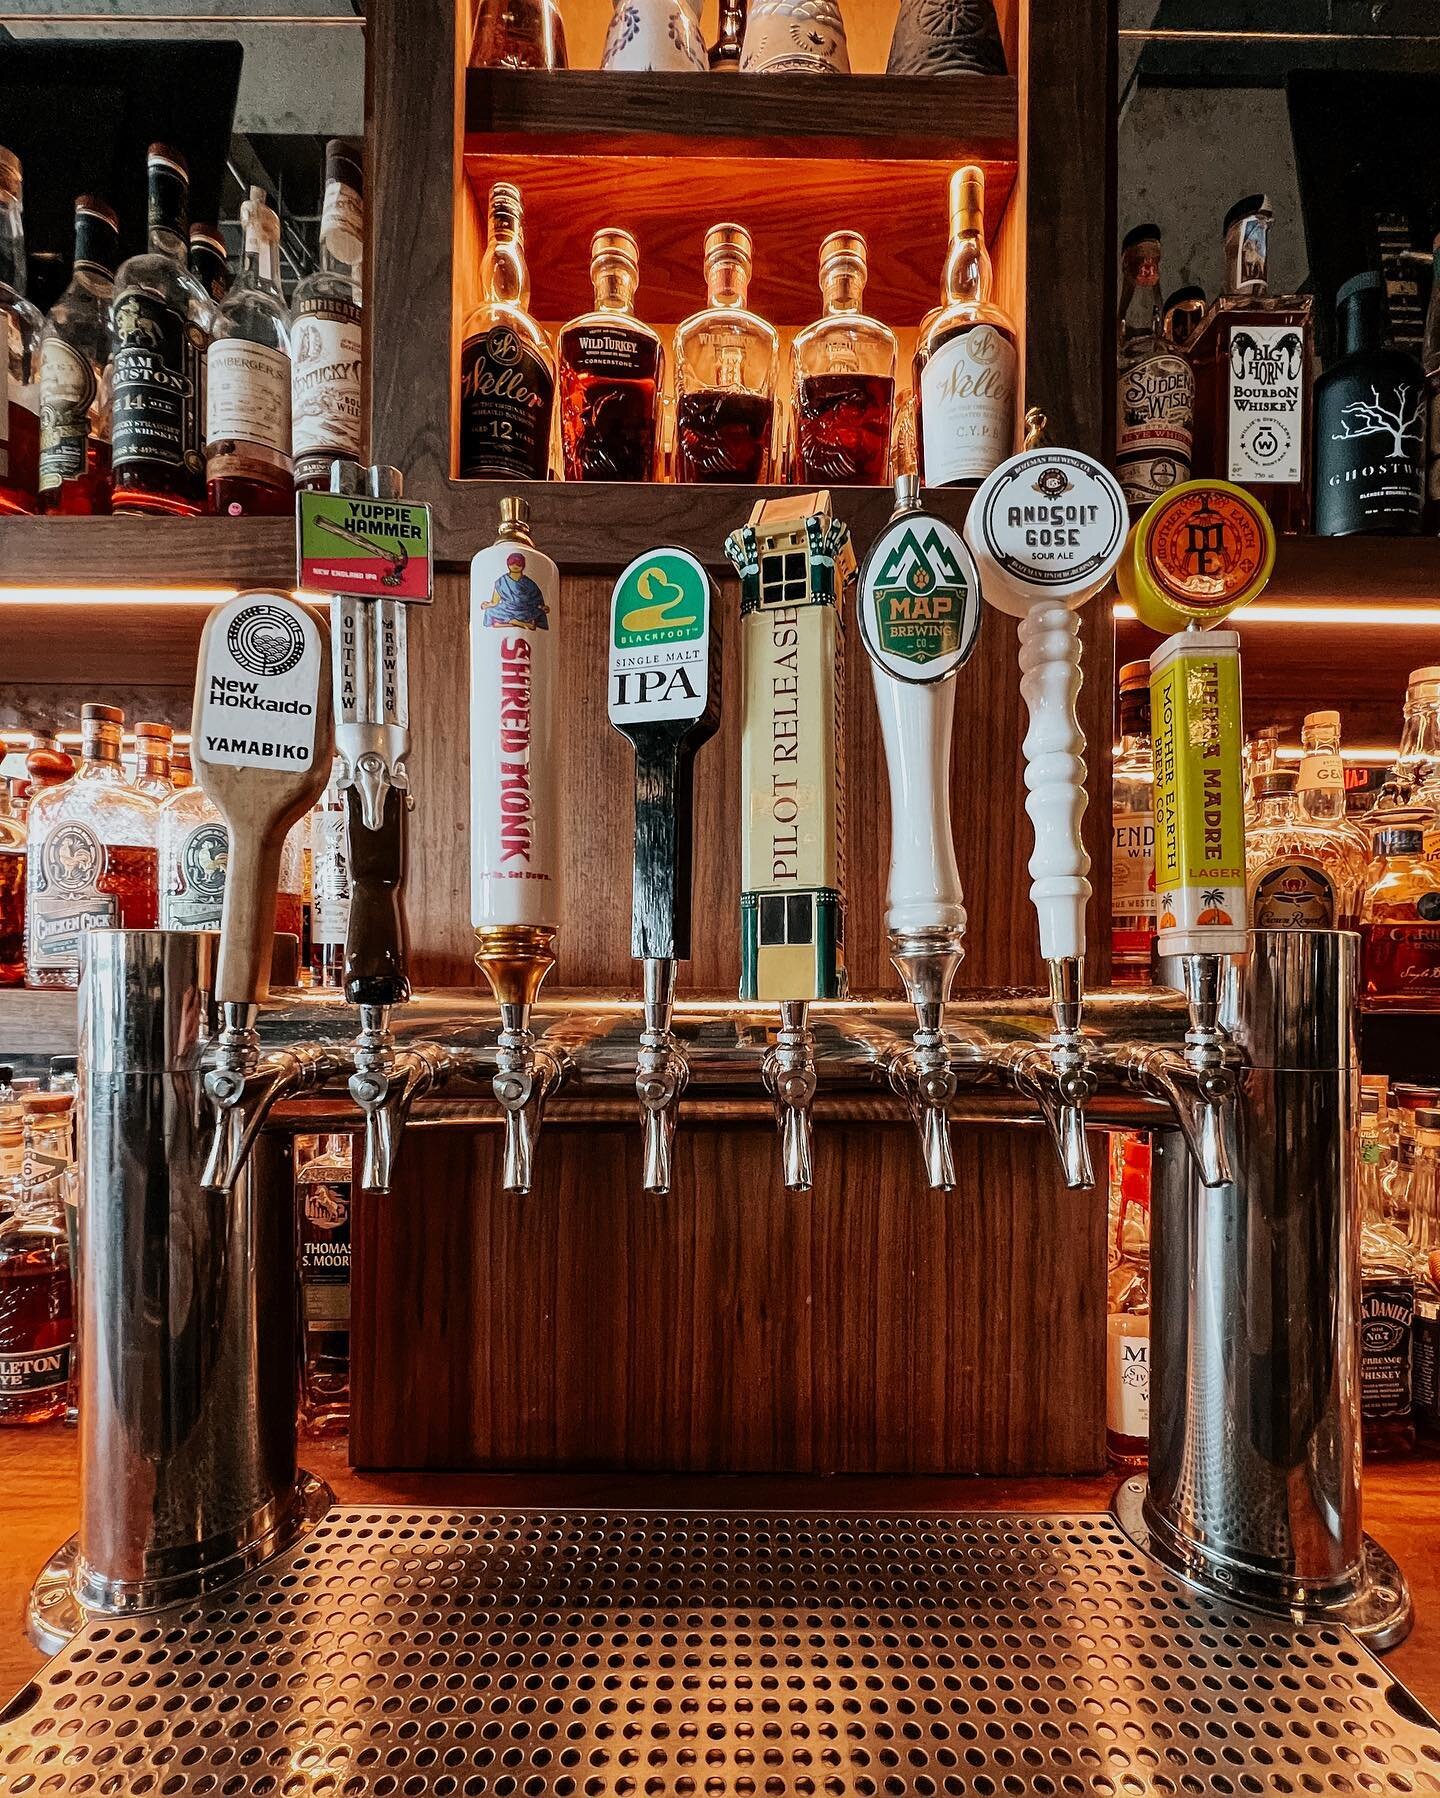 Happy Friday, Bozeman! Stop in for a pint or PITCHER of your favorite draft beer! Bar opens at 12pm everyday! Current drafts &mdash; What&rsquo;re you drinking? 🍺 

@newhokkaidobevco Yamabiko Rice Lager 
@outlawbrewing_beer Yuppie Hammer
@shredmonkb